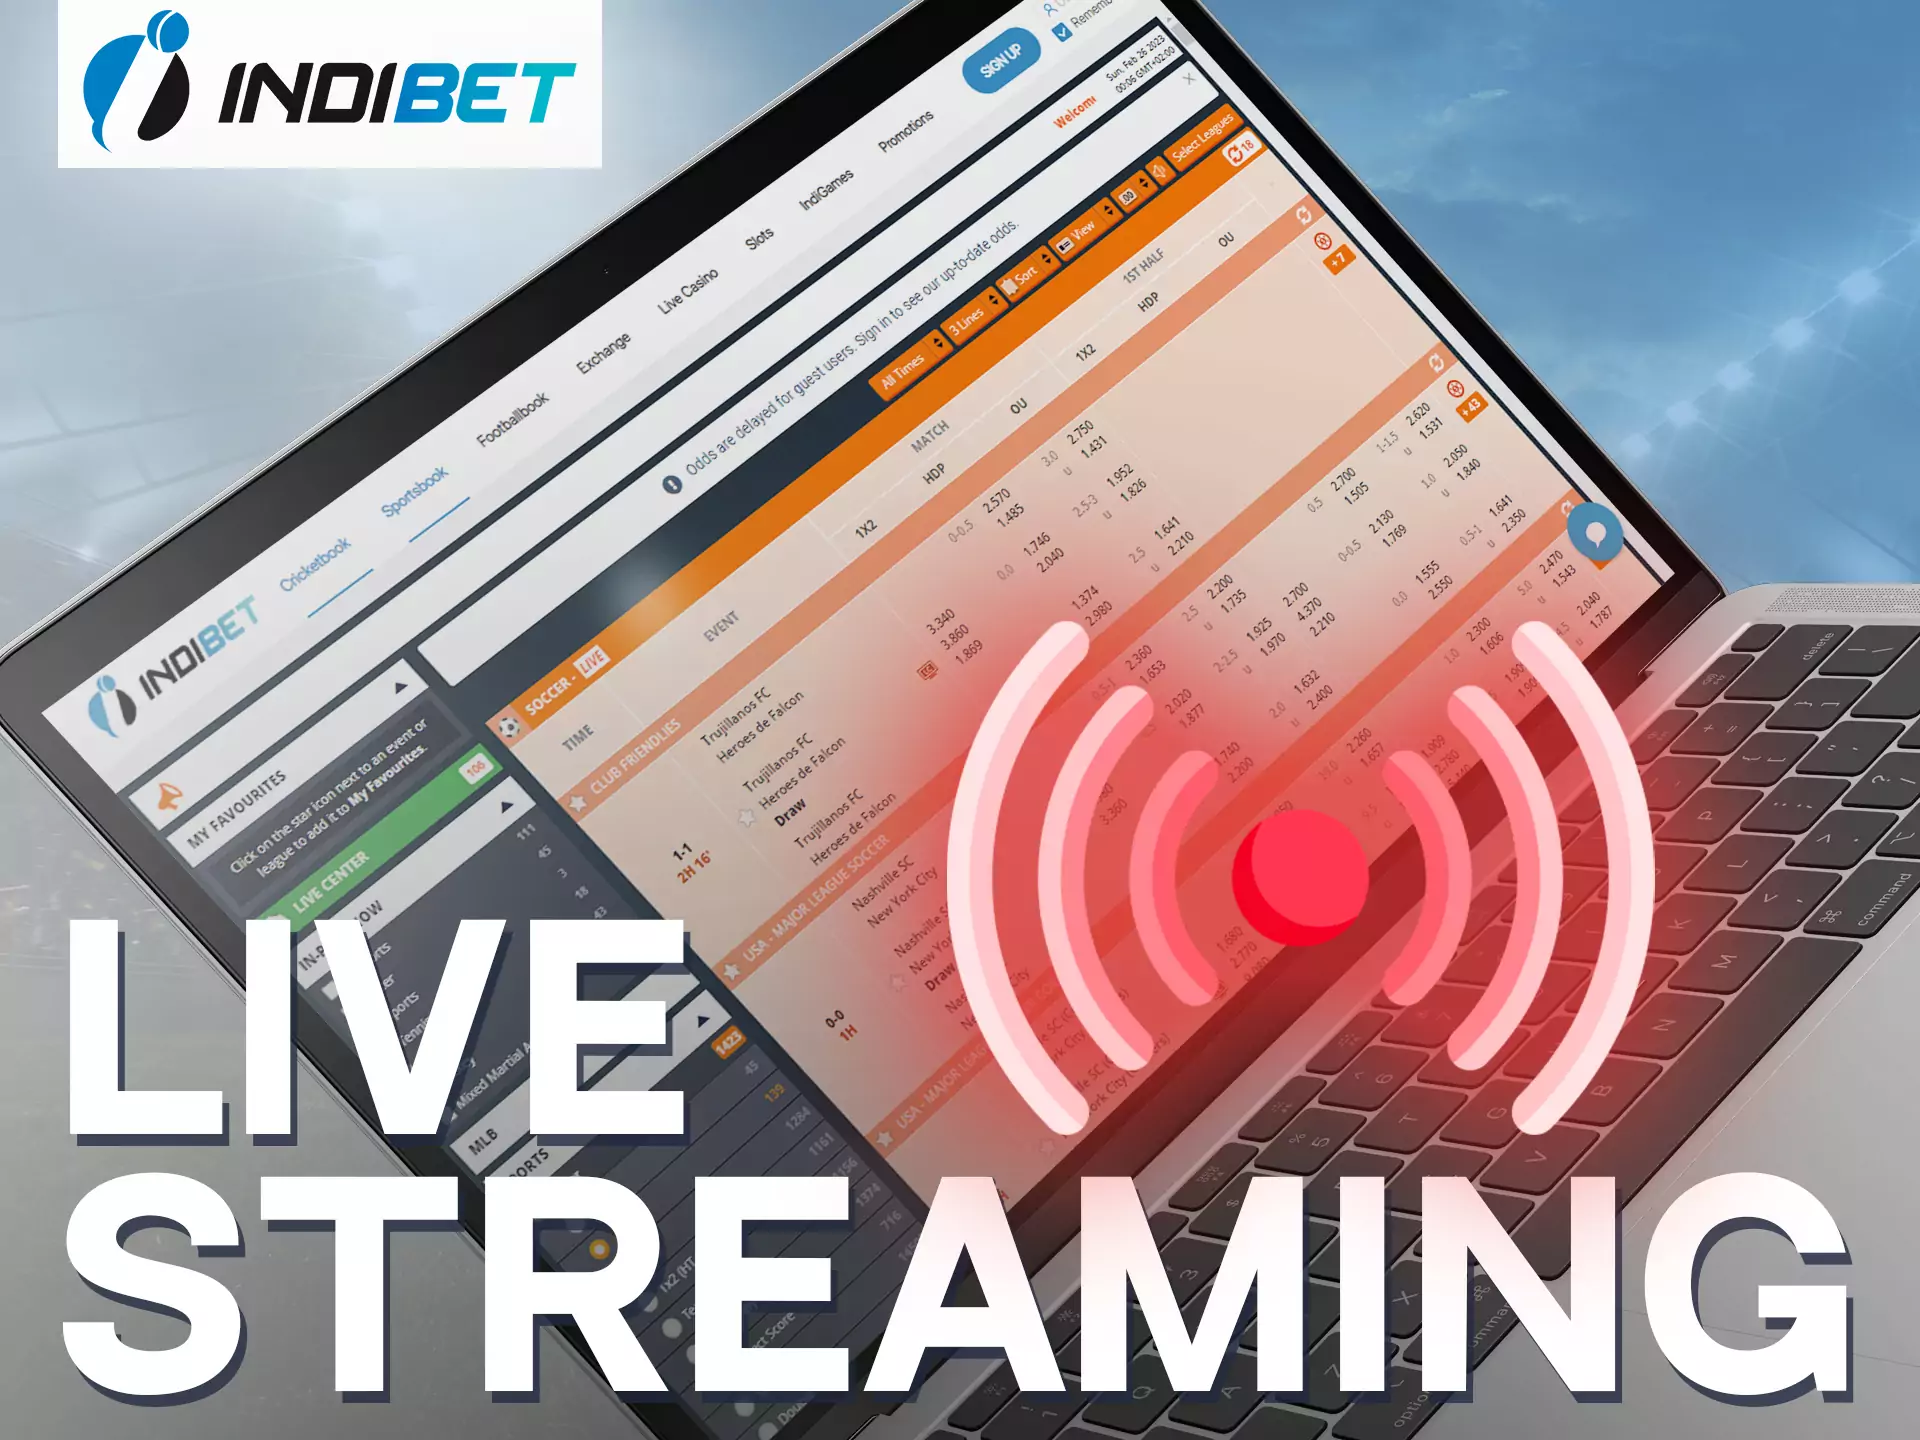 Bet on your favorite teams while they're playing on Indibet.